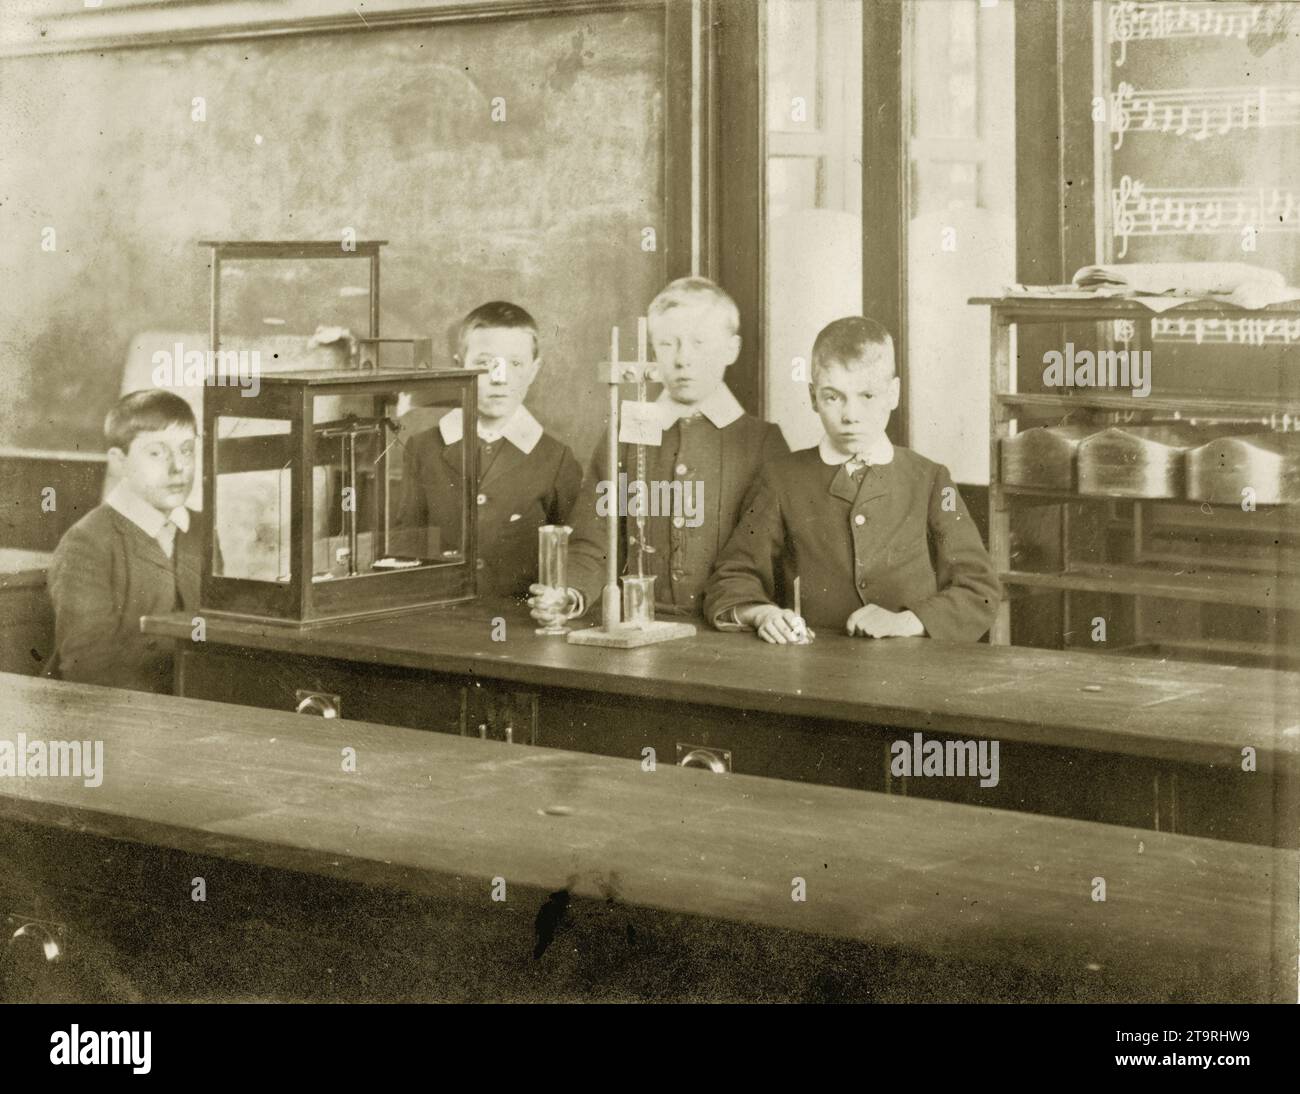 Original Edwardian or Victorian postcard of Edwardian or Victorian schoolboys attending science lesson in classroom, with equipment. Circa 1905, U.K. Stock Photo